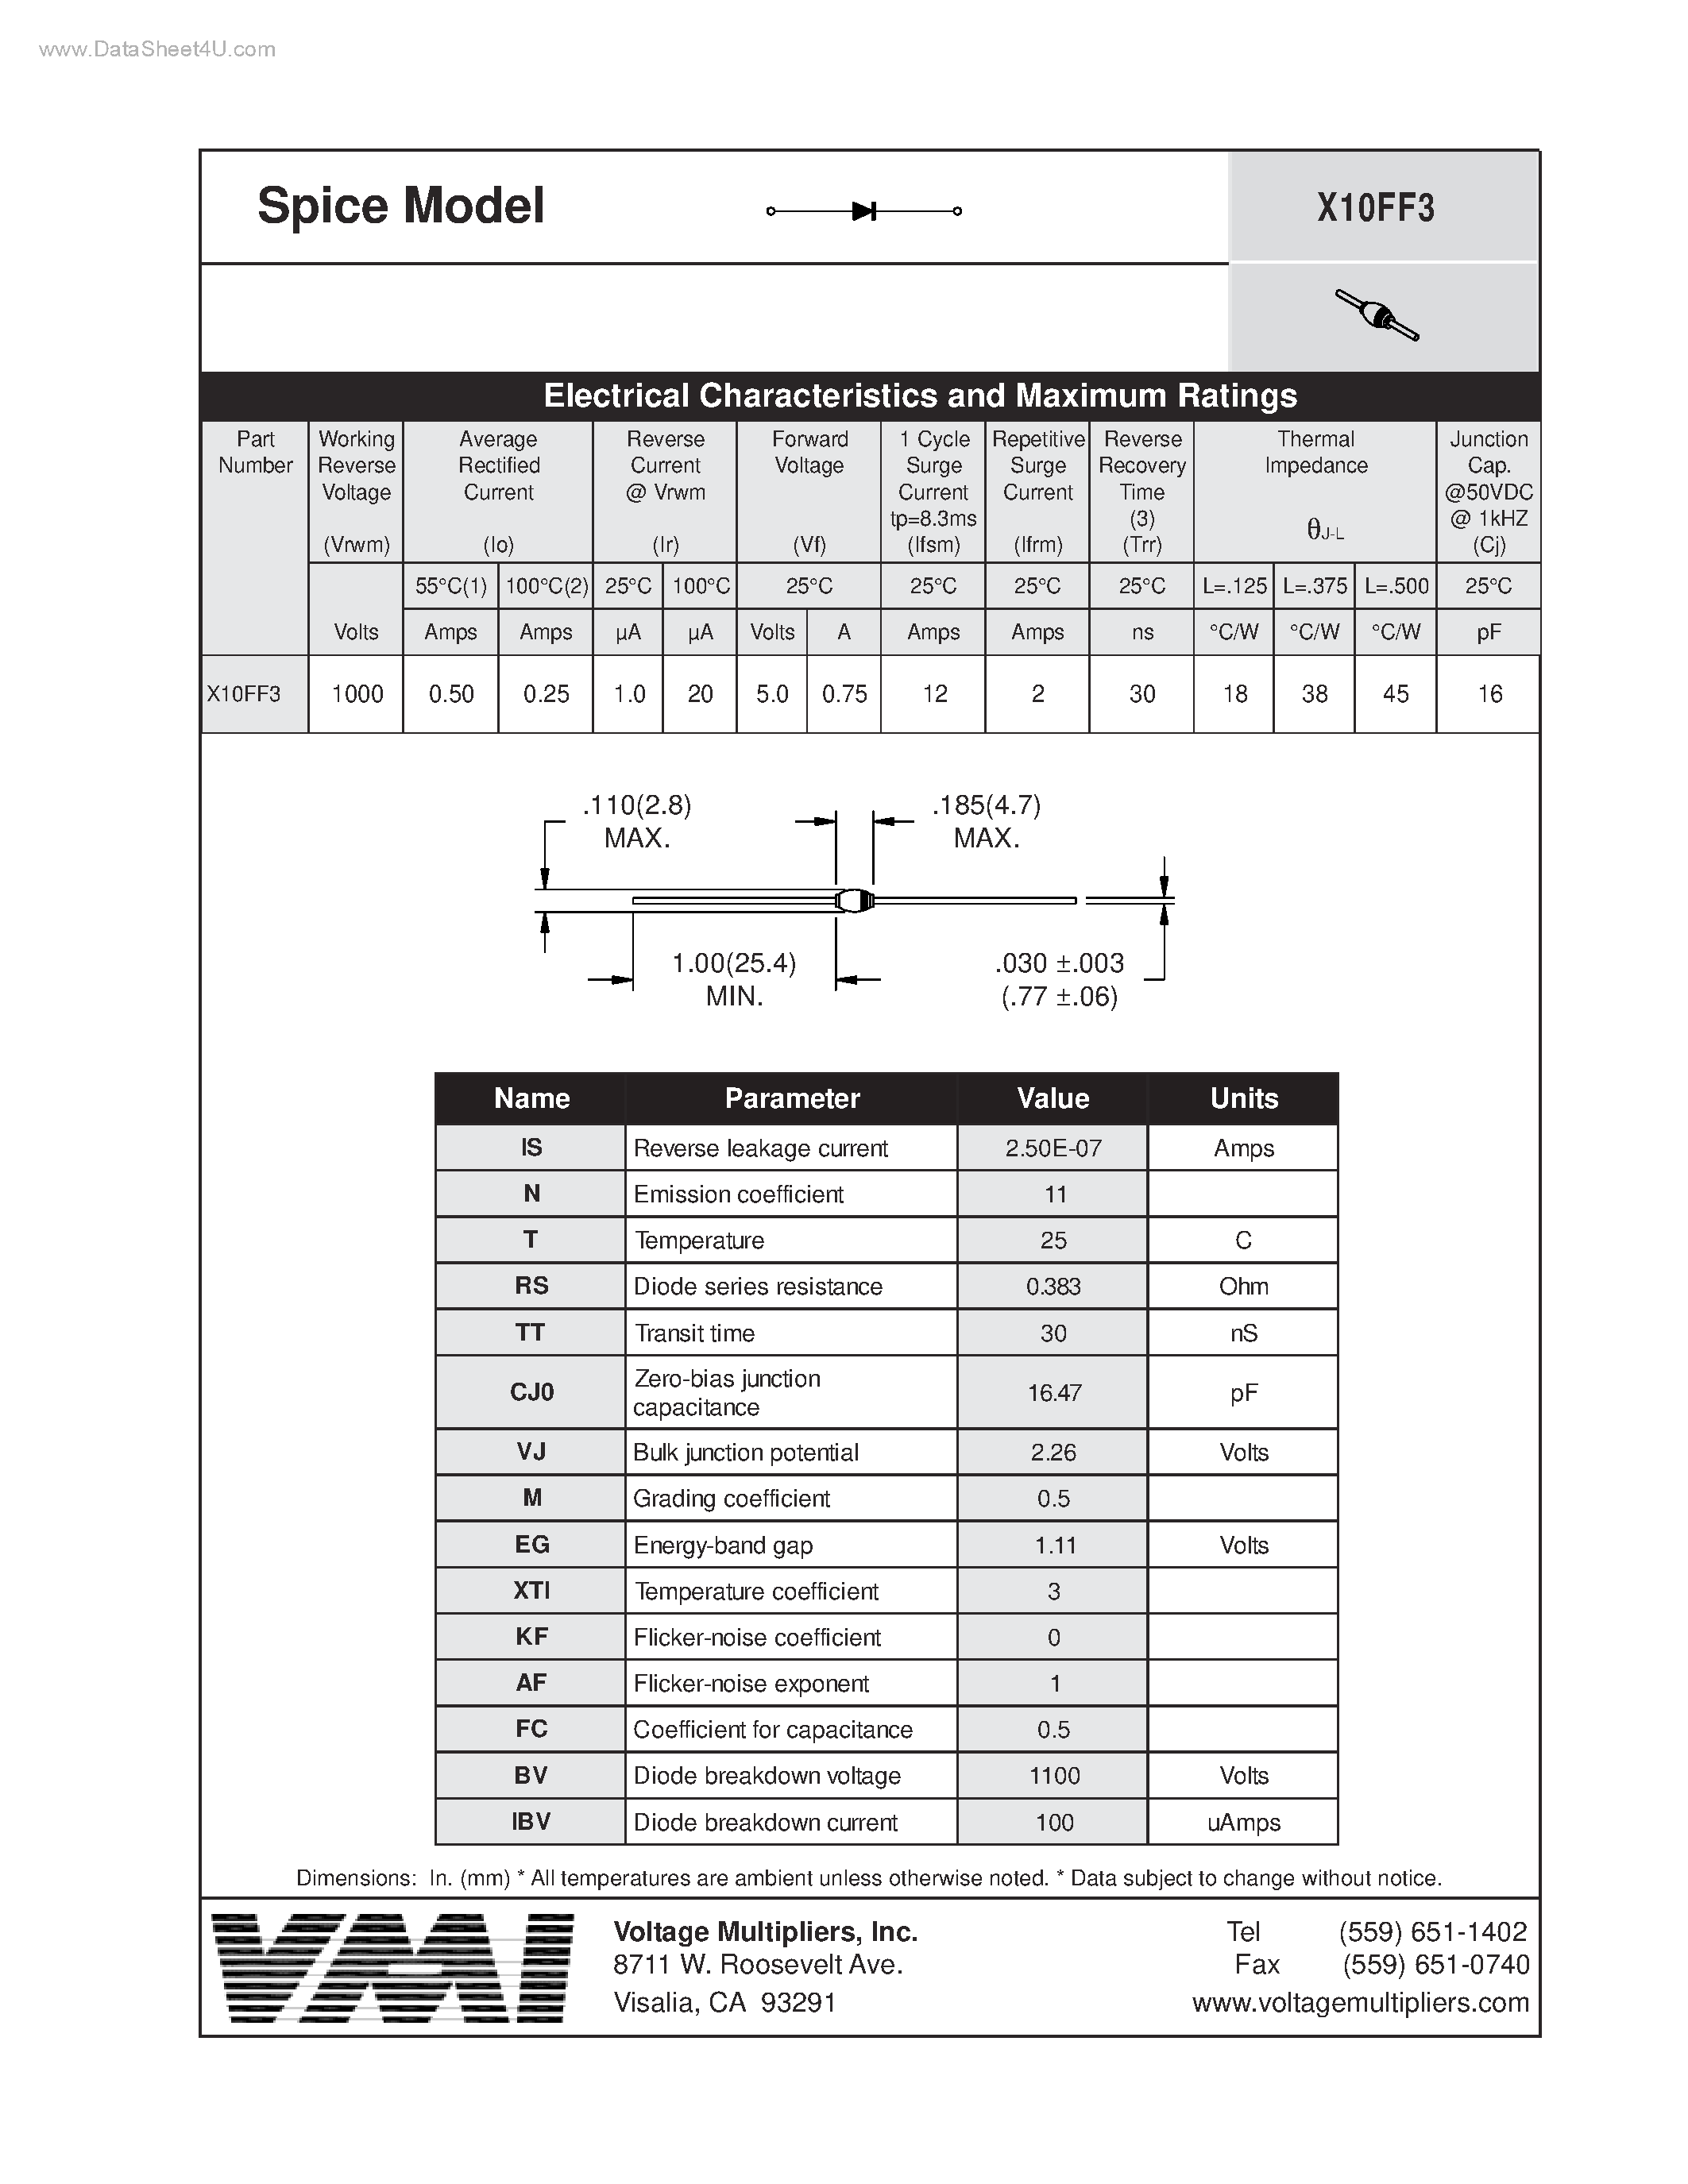 Datasheet X10FF3 - Spice Model page 1